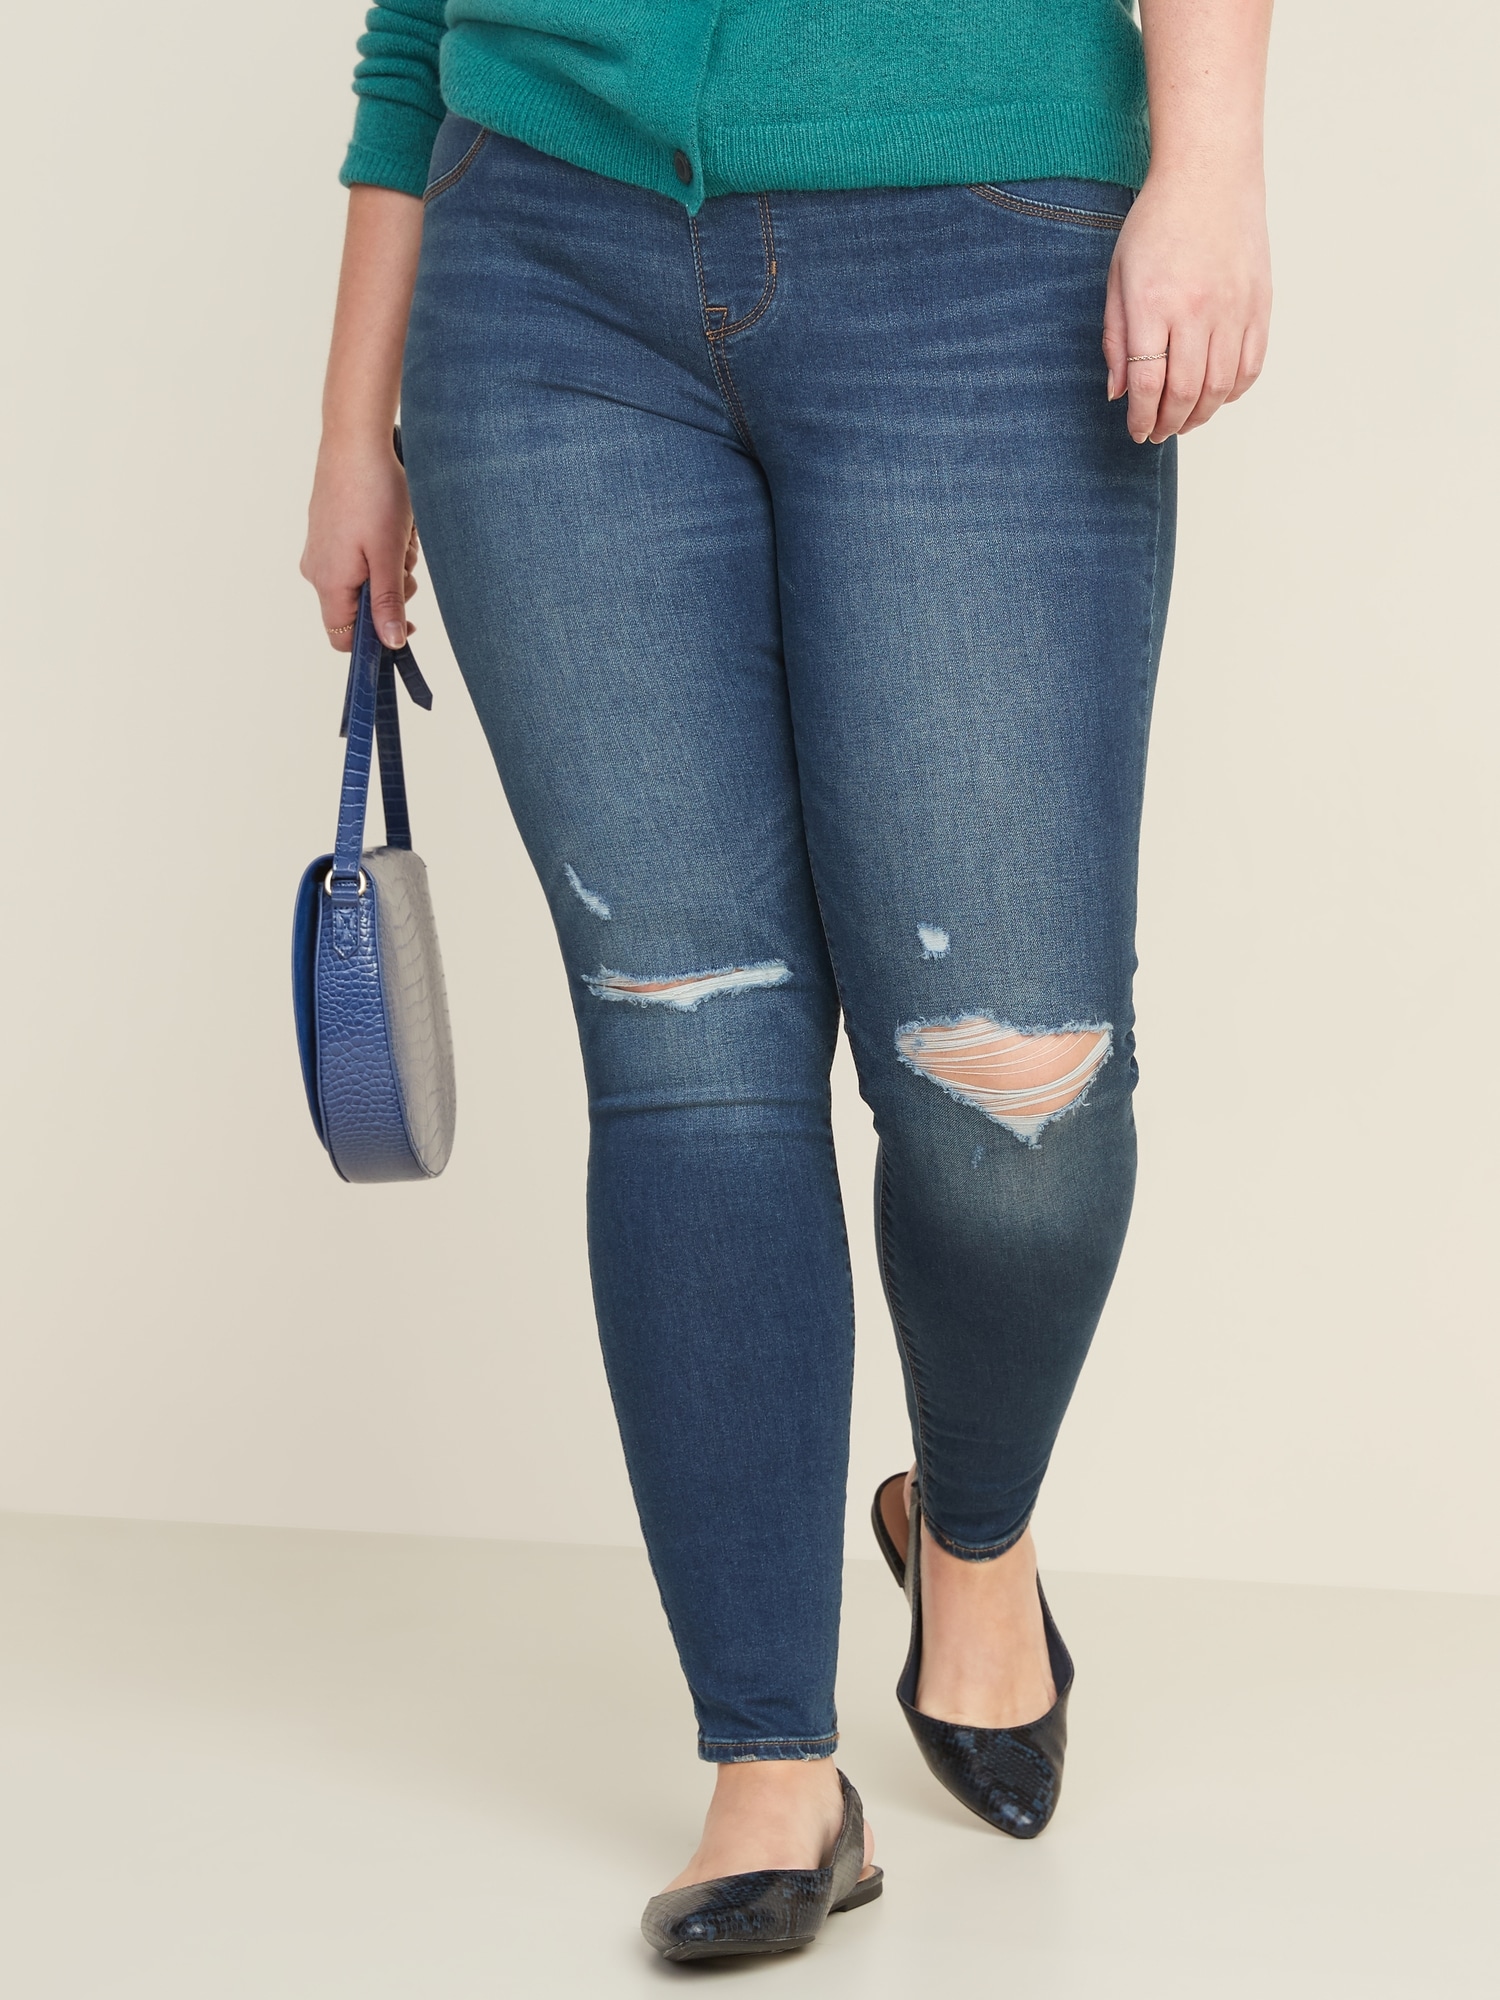 Distressed Denim Ripped Jeggings in Navy - Women's – Apple Girl Boutique